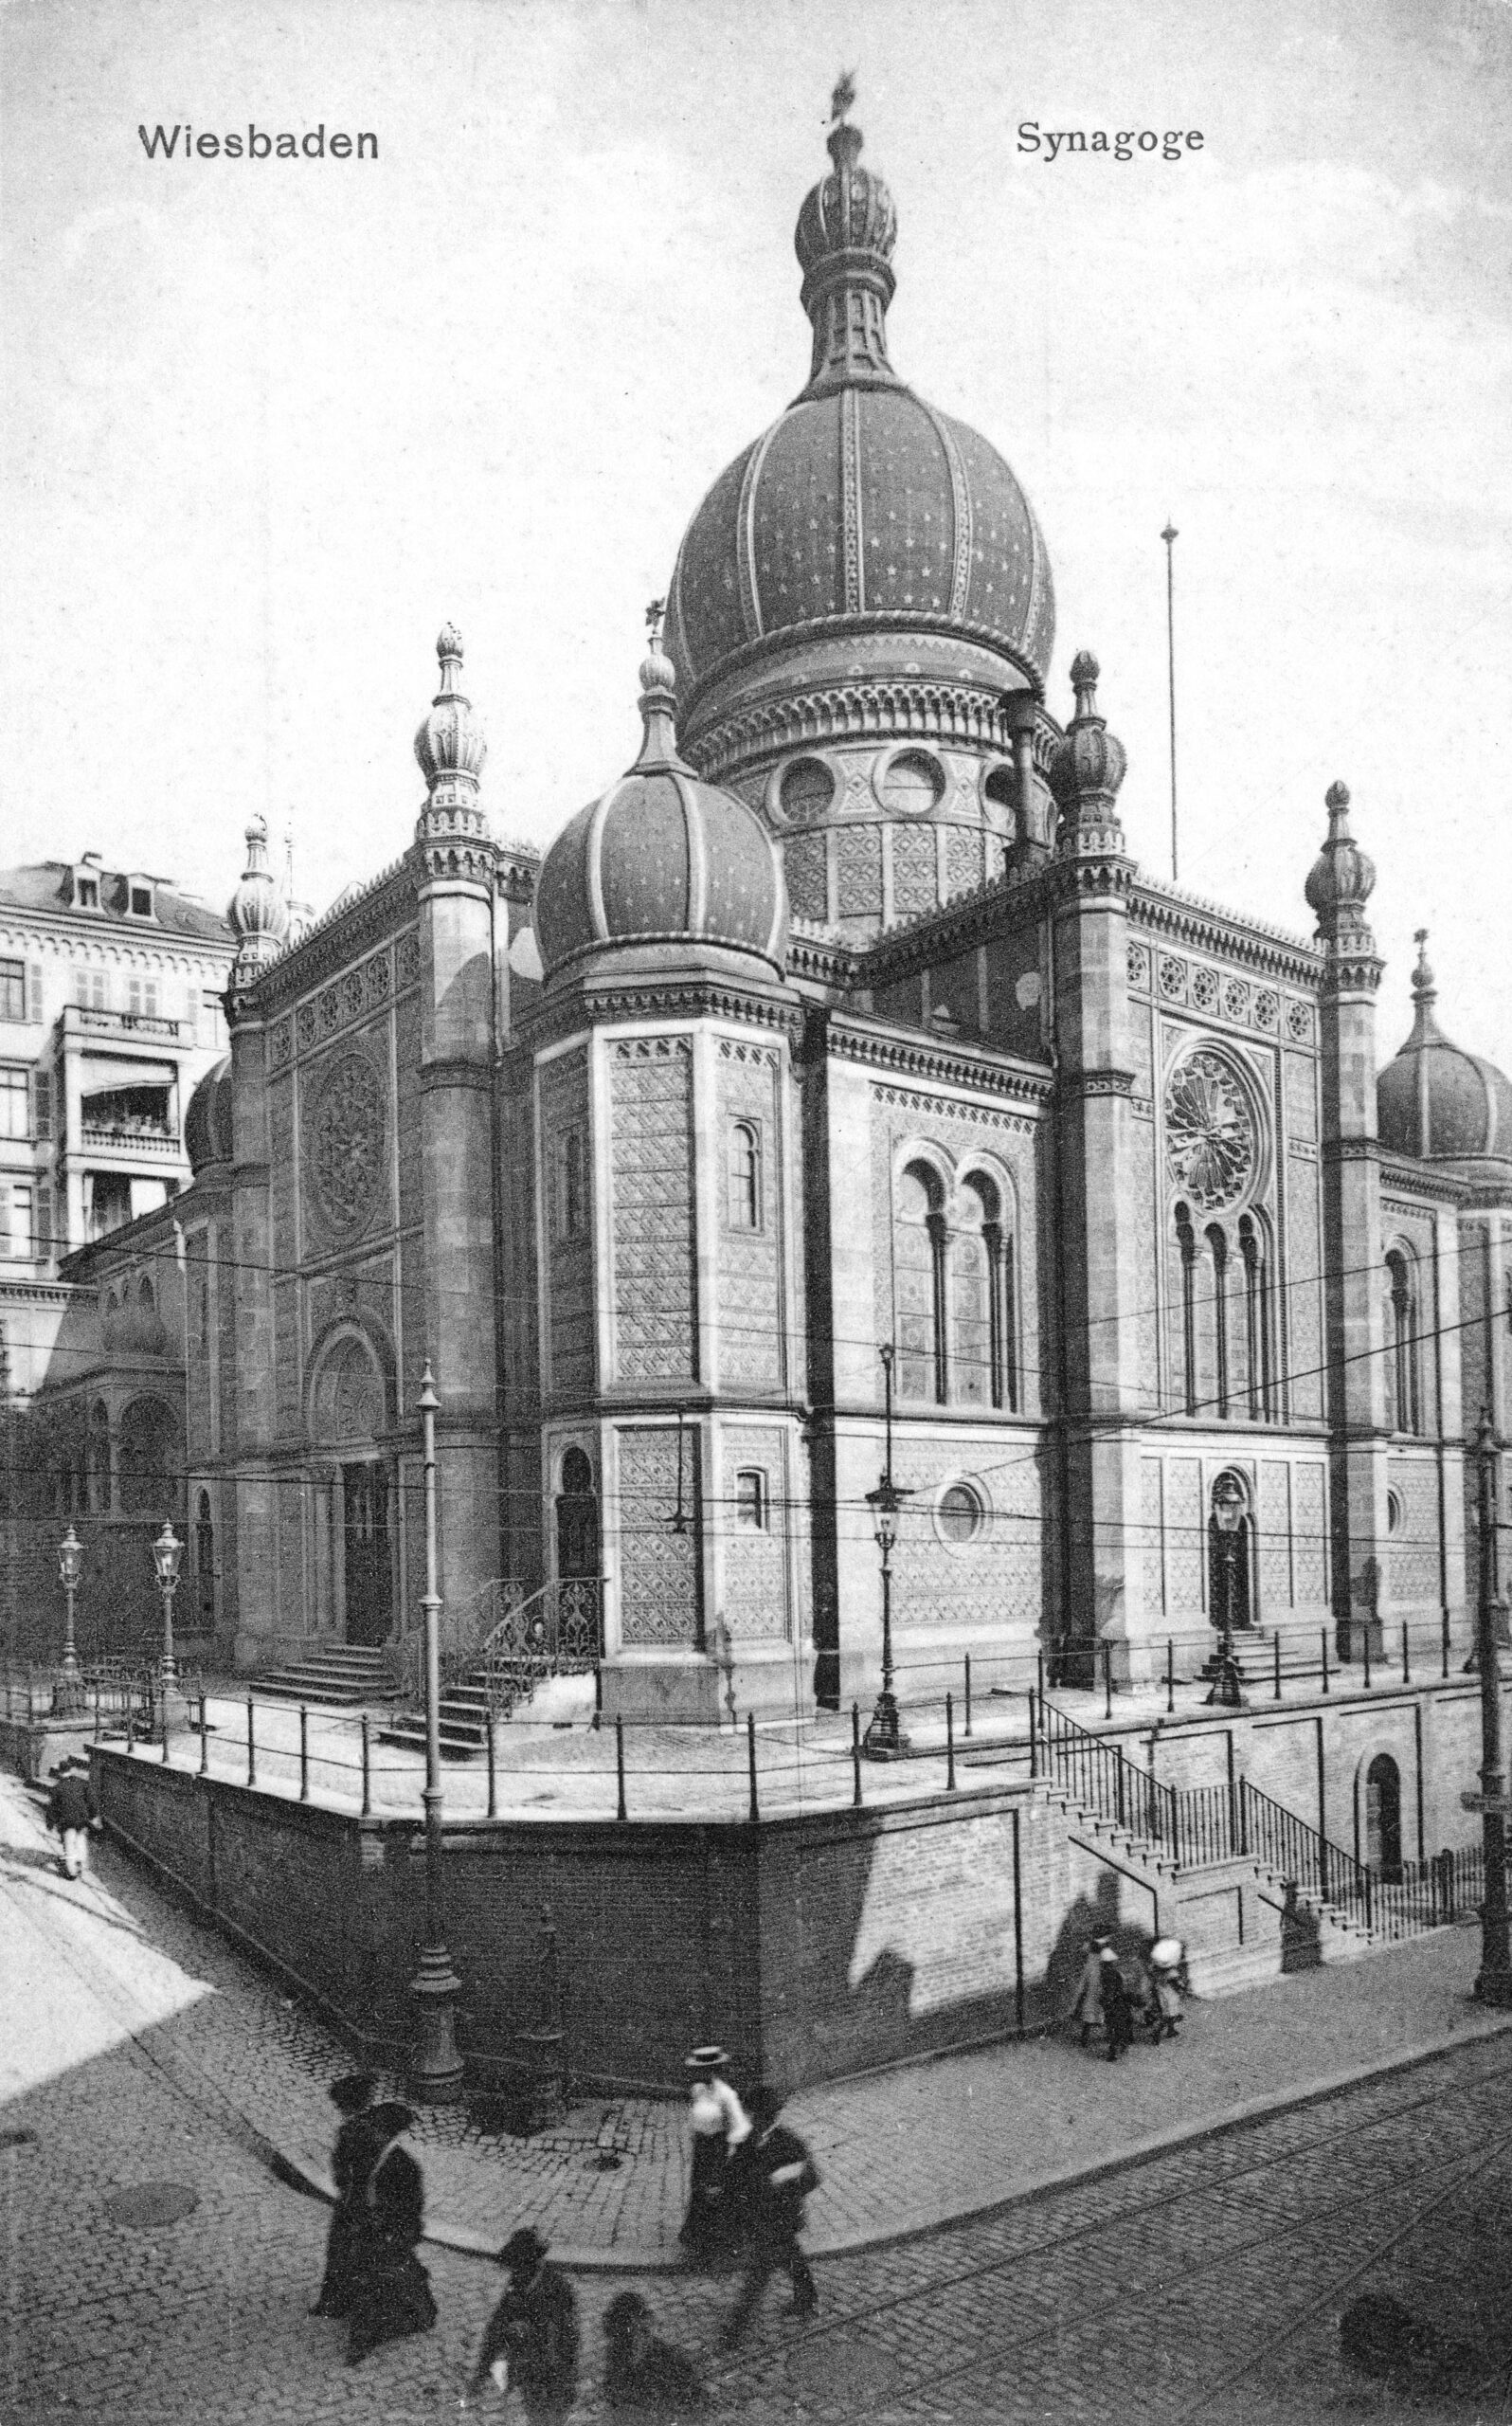 The synagogue of the Jewish Community on the Michelsberg, Wiesbaden, ca. 1900-1910. StadtA WI, PK 000164